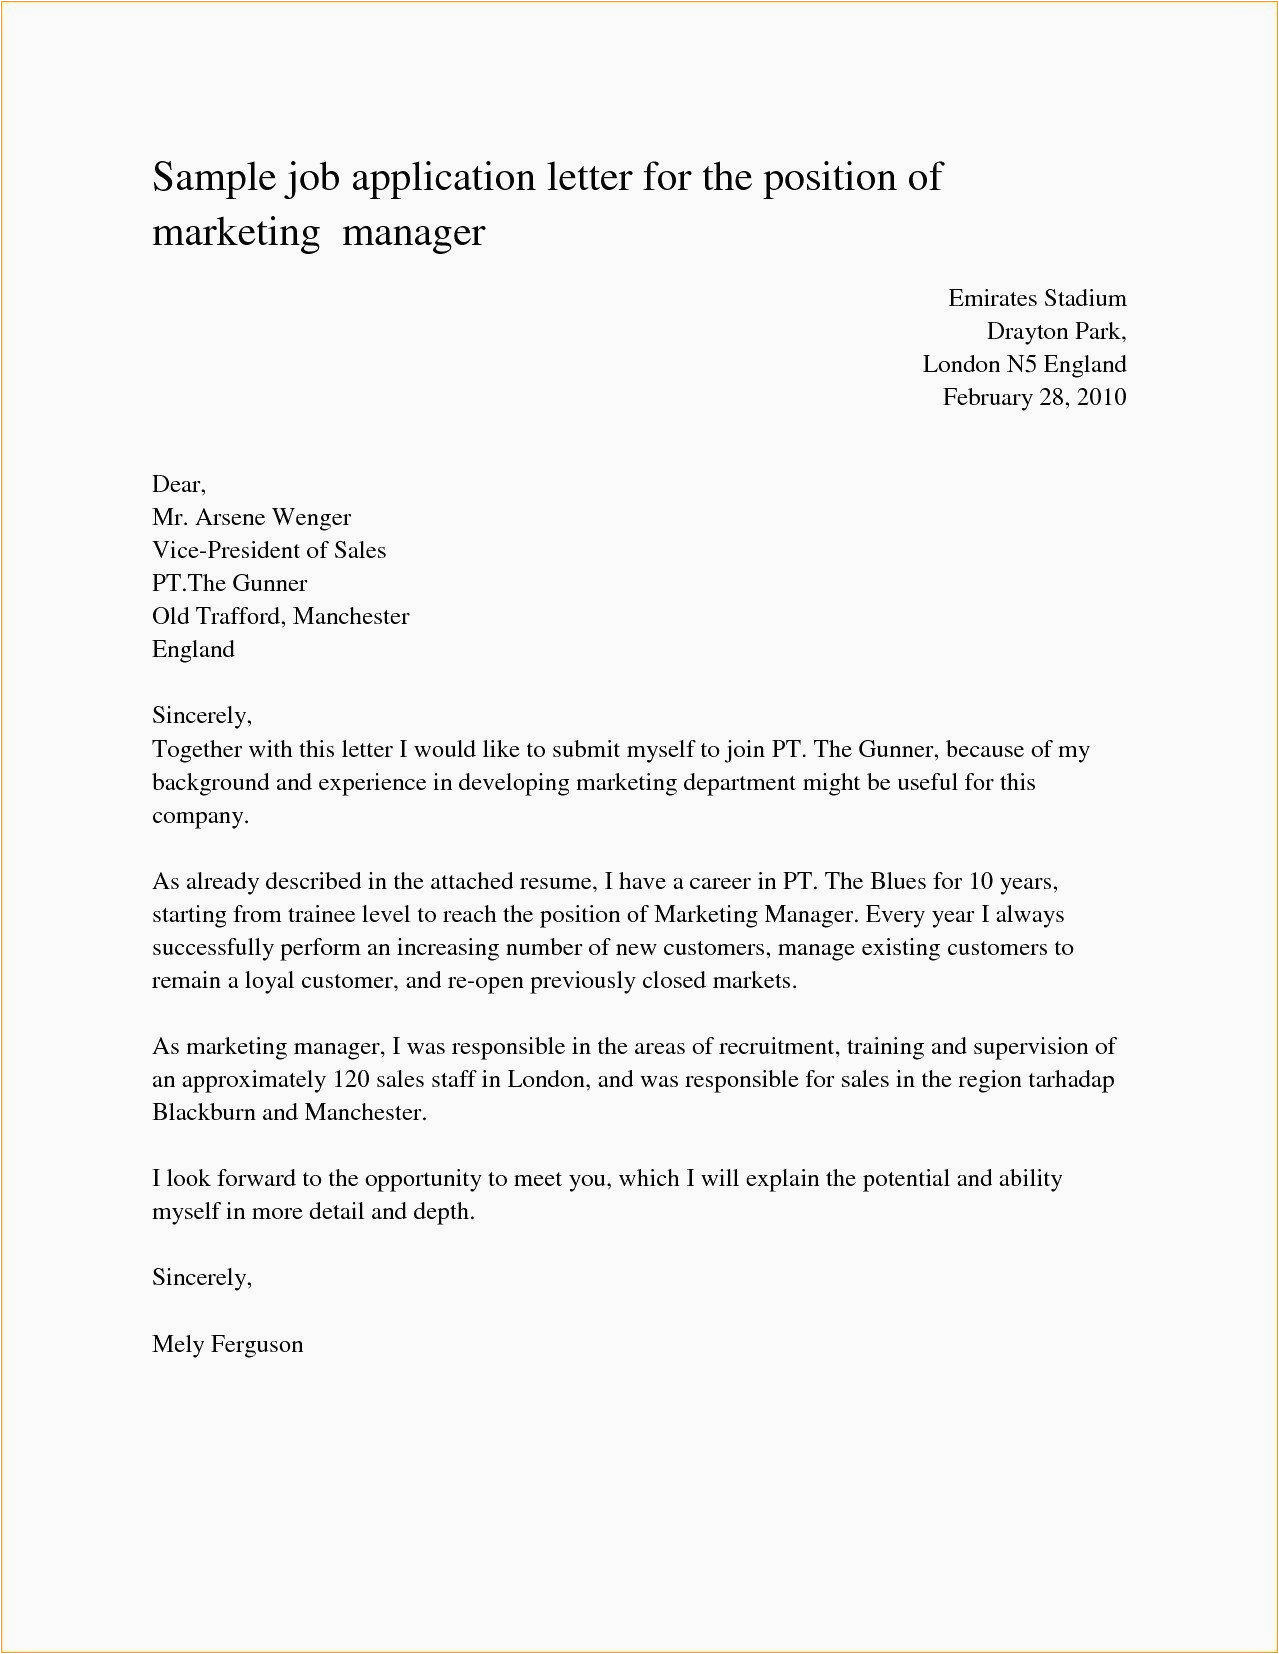 Sample Letter to attach with Resume Should My Cover Letter Be attached to Resume